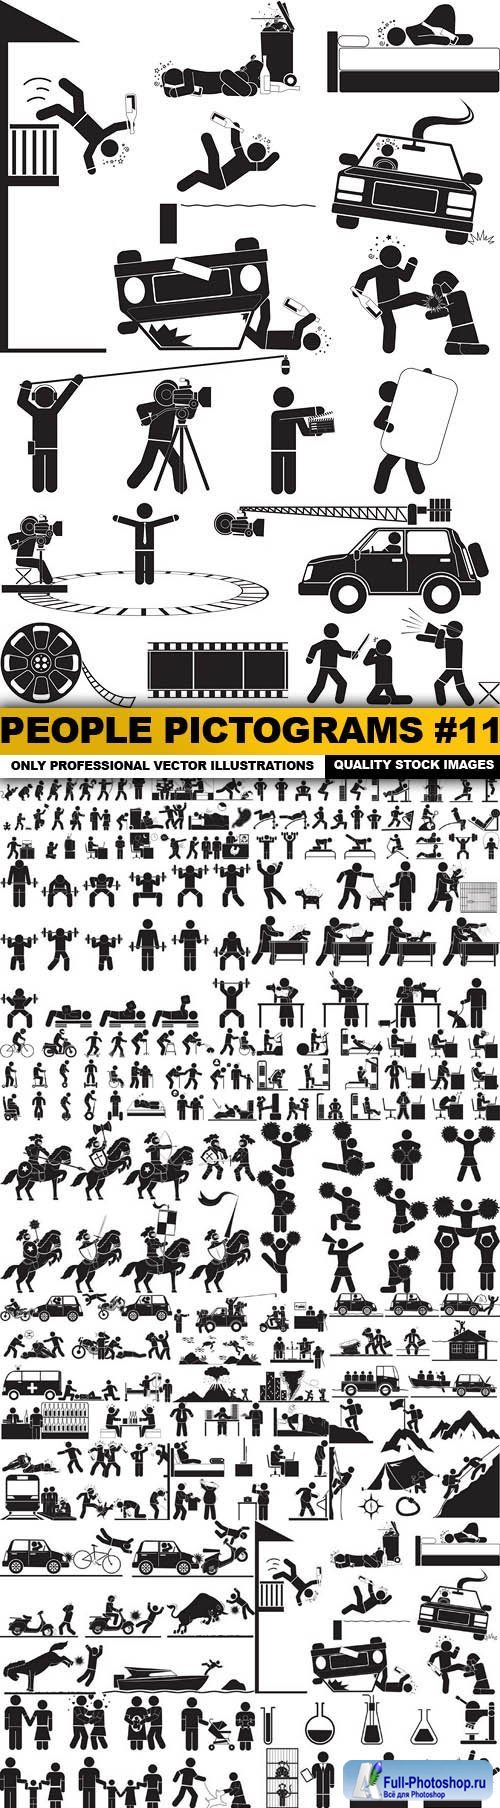 People Pictograms #11 - 25 Vector